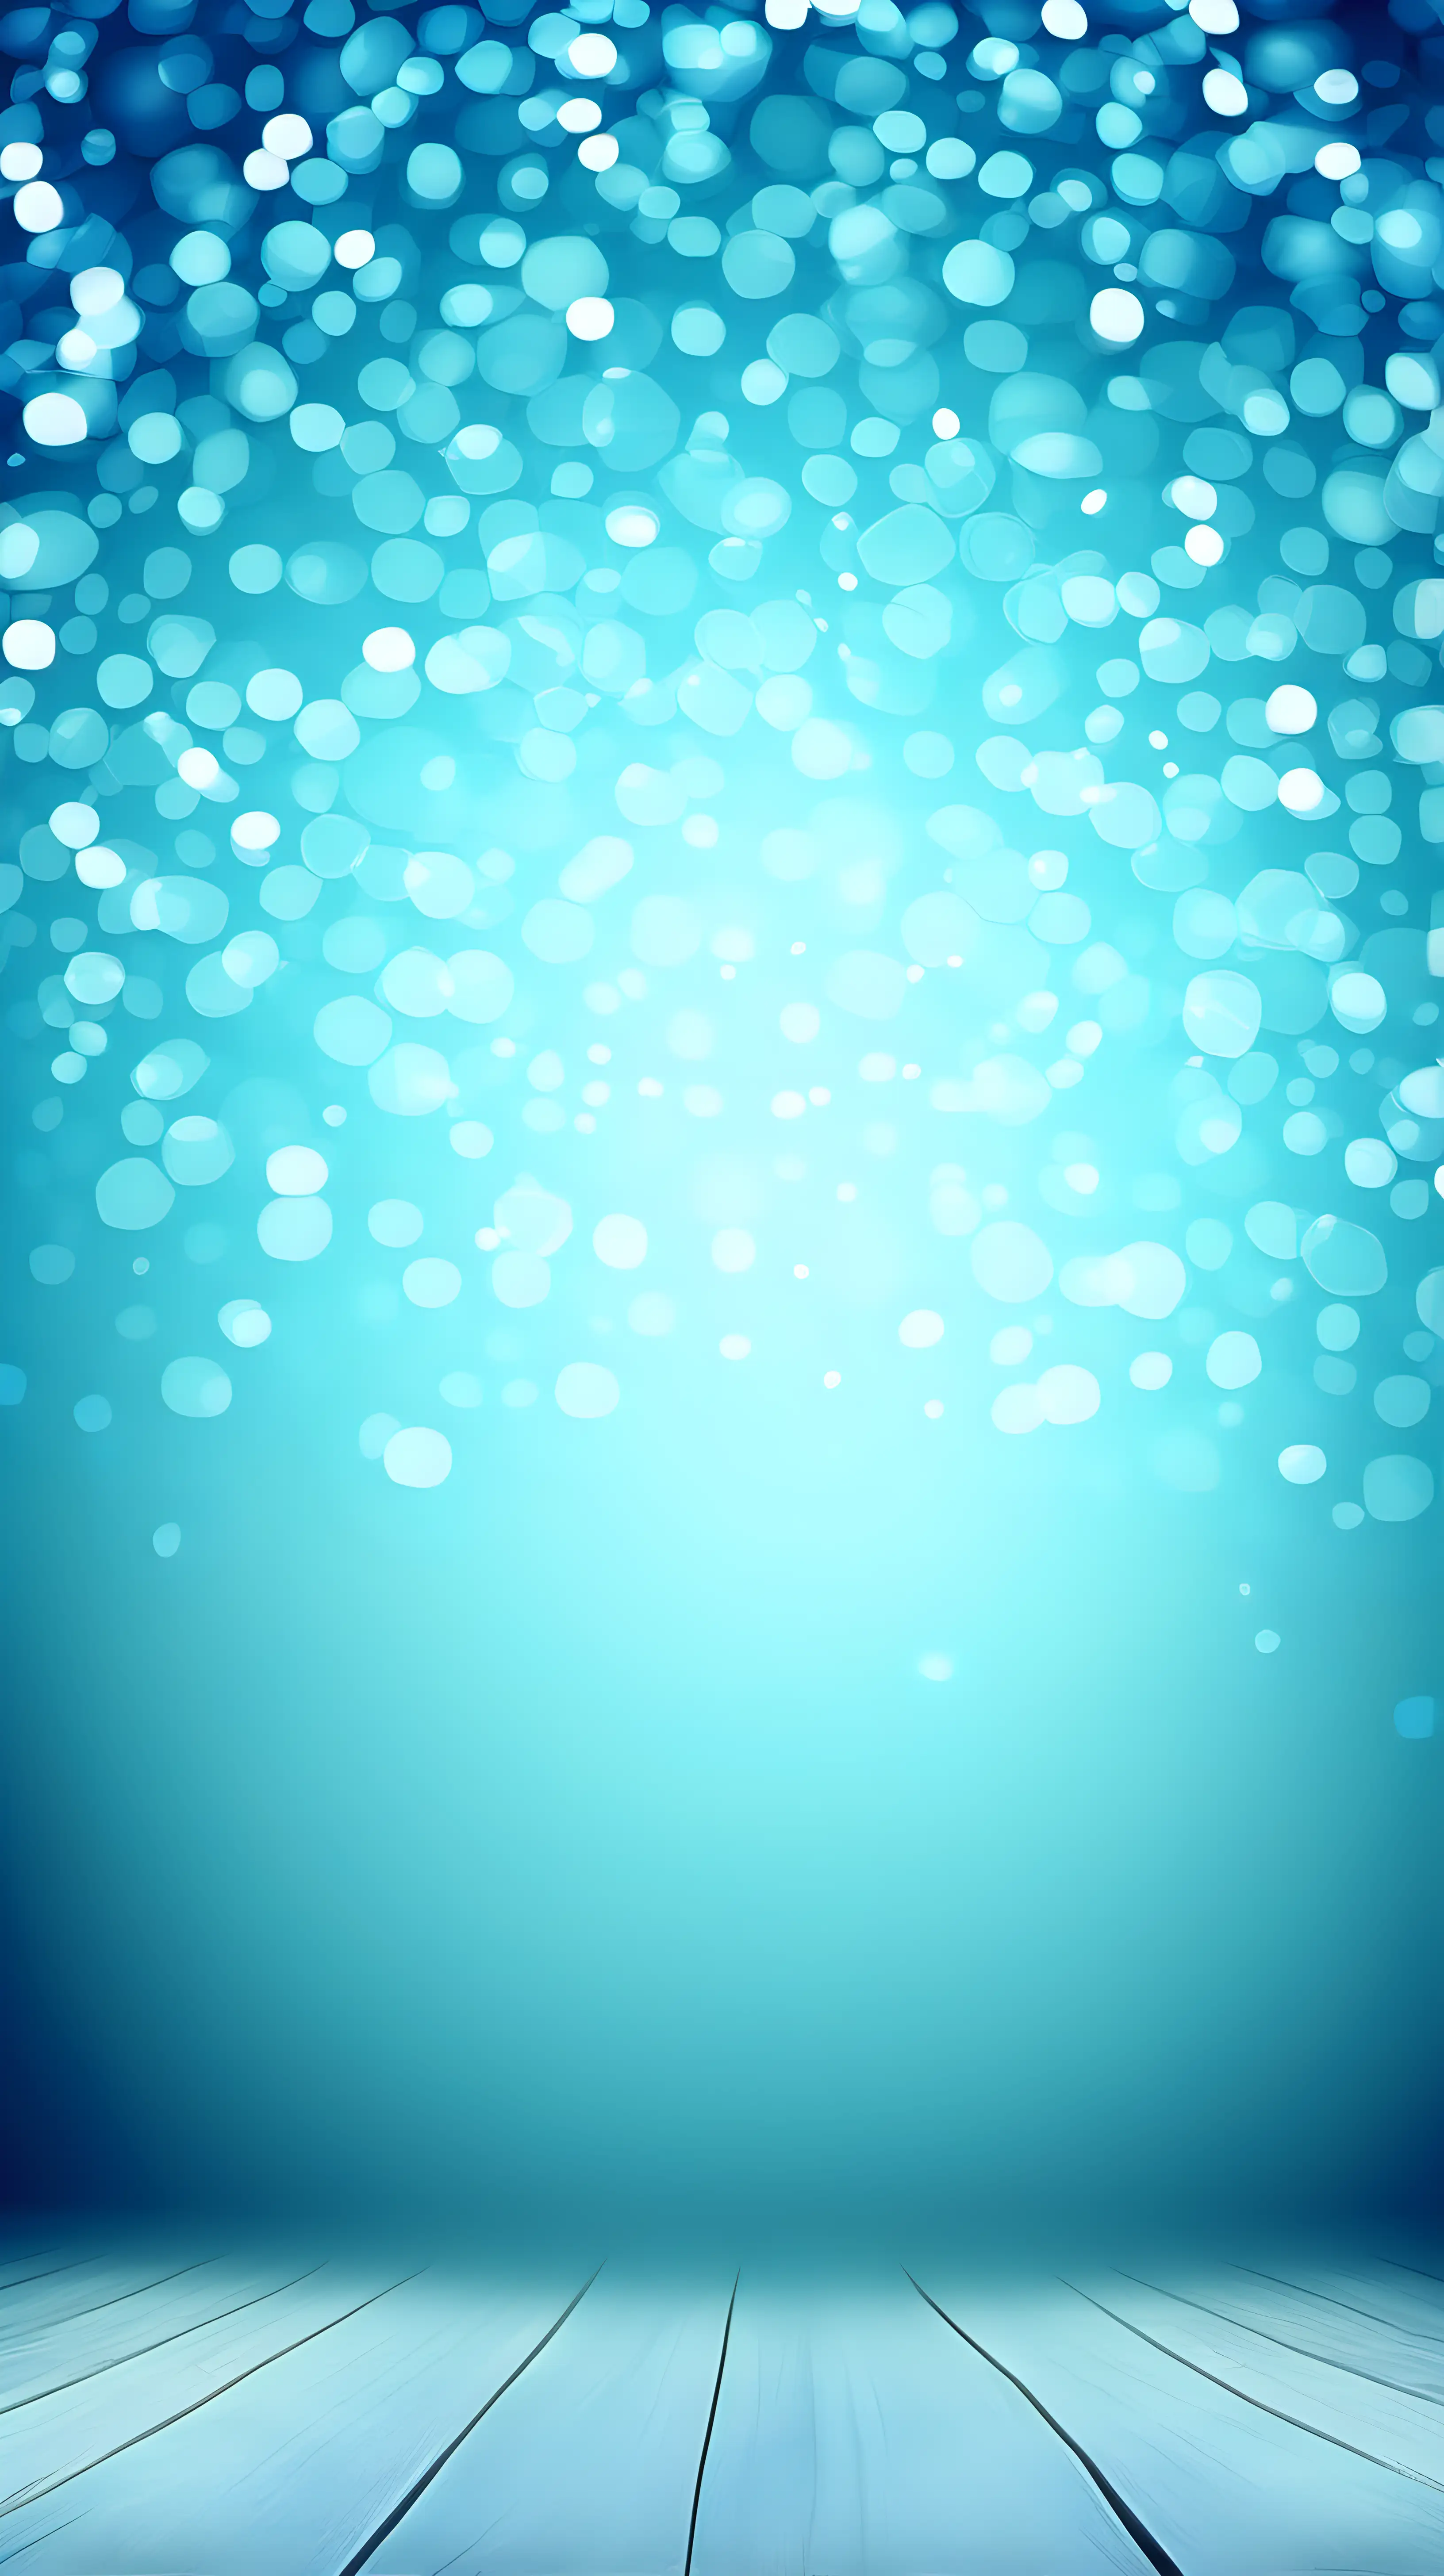 Ethereal Blue and Powder Blue Bokeh Background with Subtle Lower Level Floor